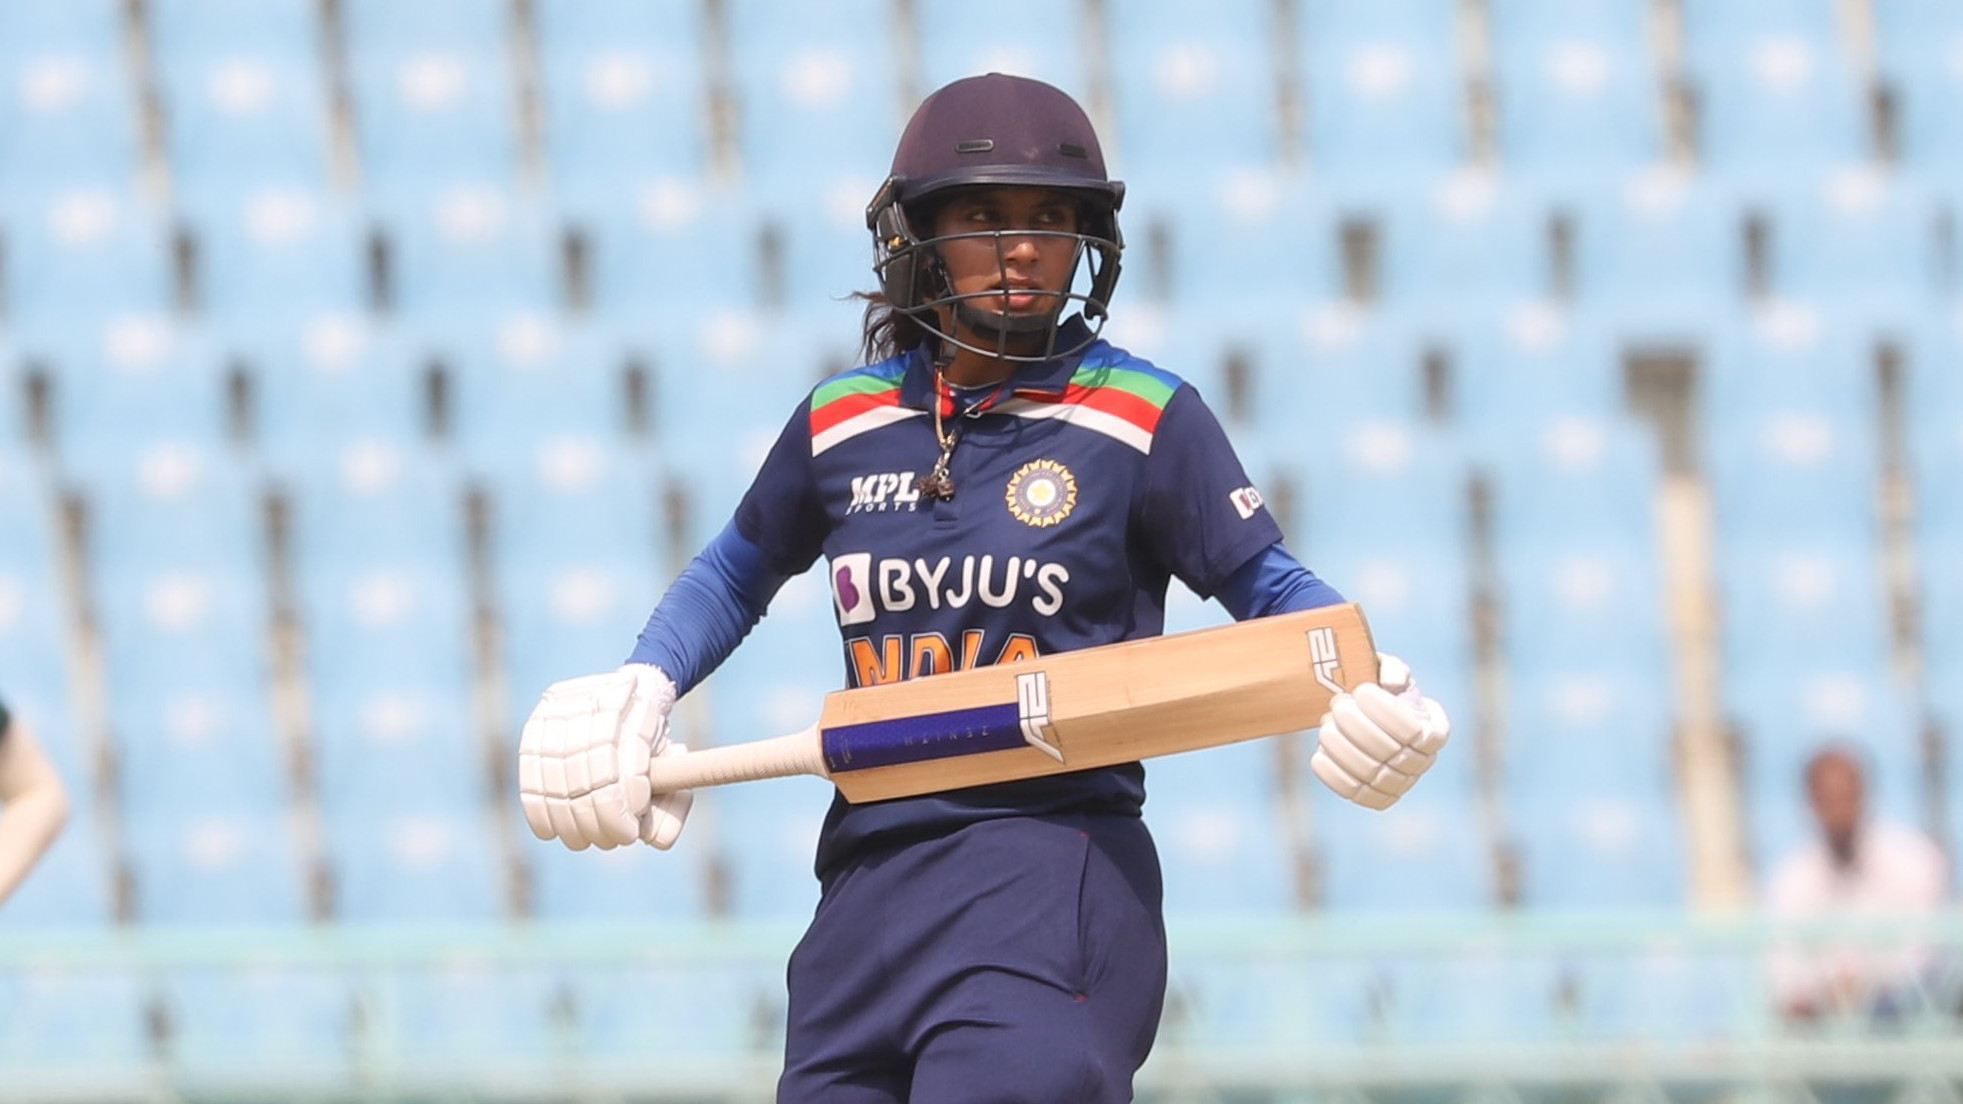 INDW v SAW 2021: Mithali Raj becomes the first woman to scale 7000-run peak in ODIs